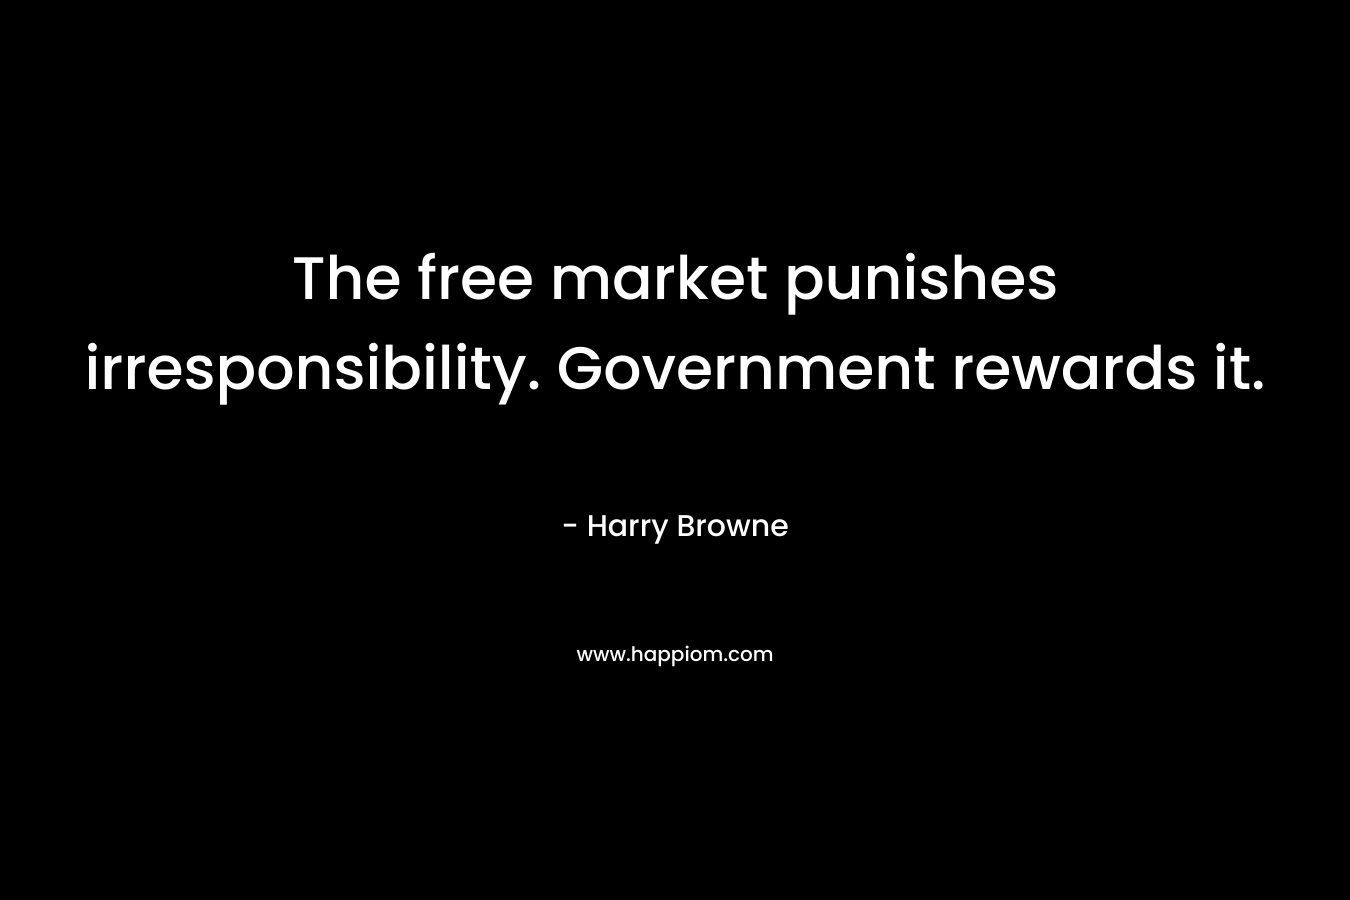 The free market punishes irresponsibility. Government rewards it. – Harry Browne